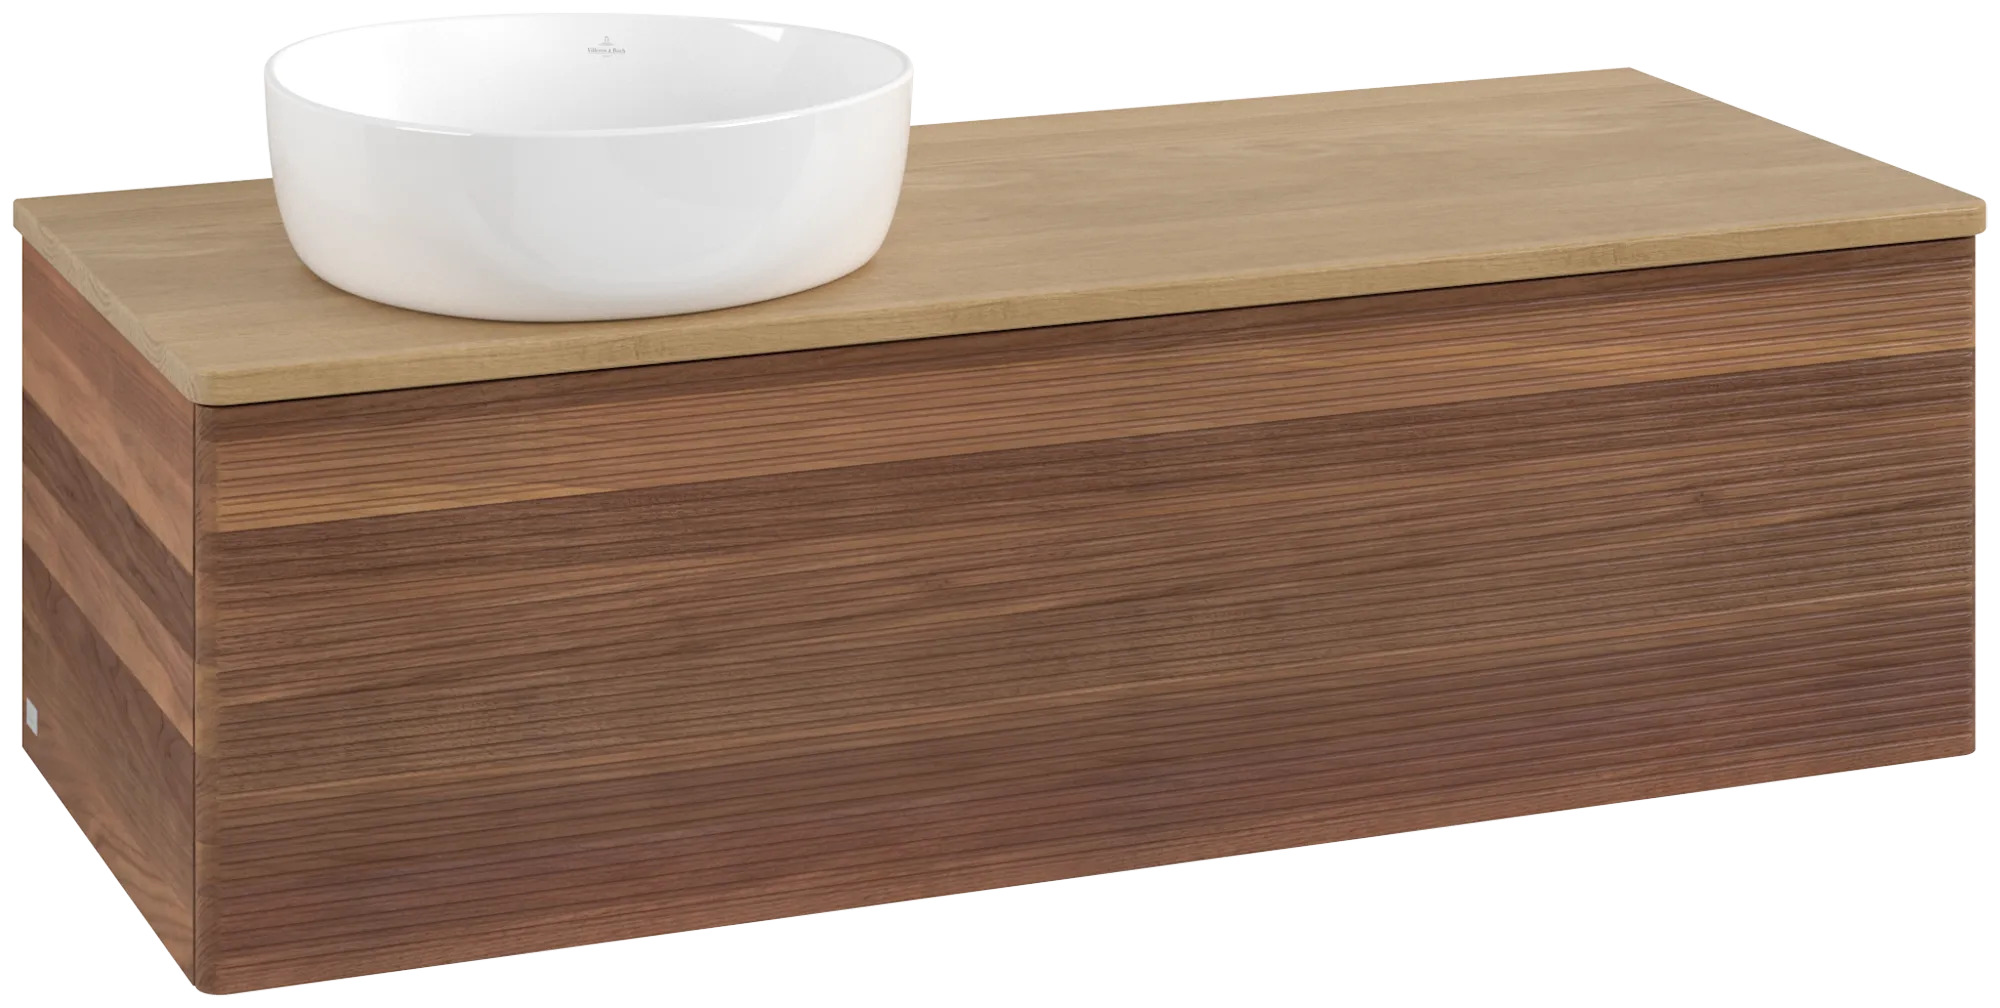 VILLEROY BOCH Antao Vanity unit, with lighting, 1 pull-out compartment, 1200 x 360 x 500 mm, Front with grain texture, Warm Walnut / Honey Oak #L33111HM resmi